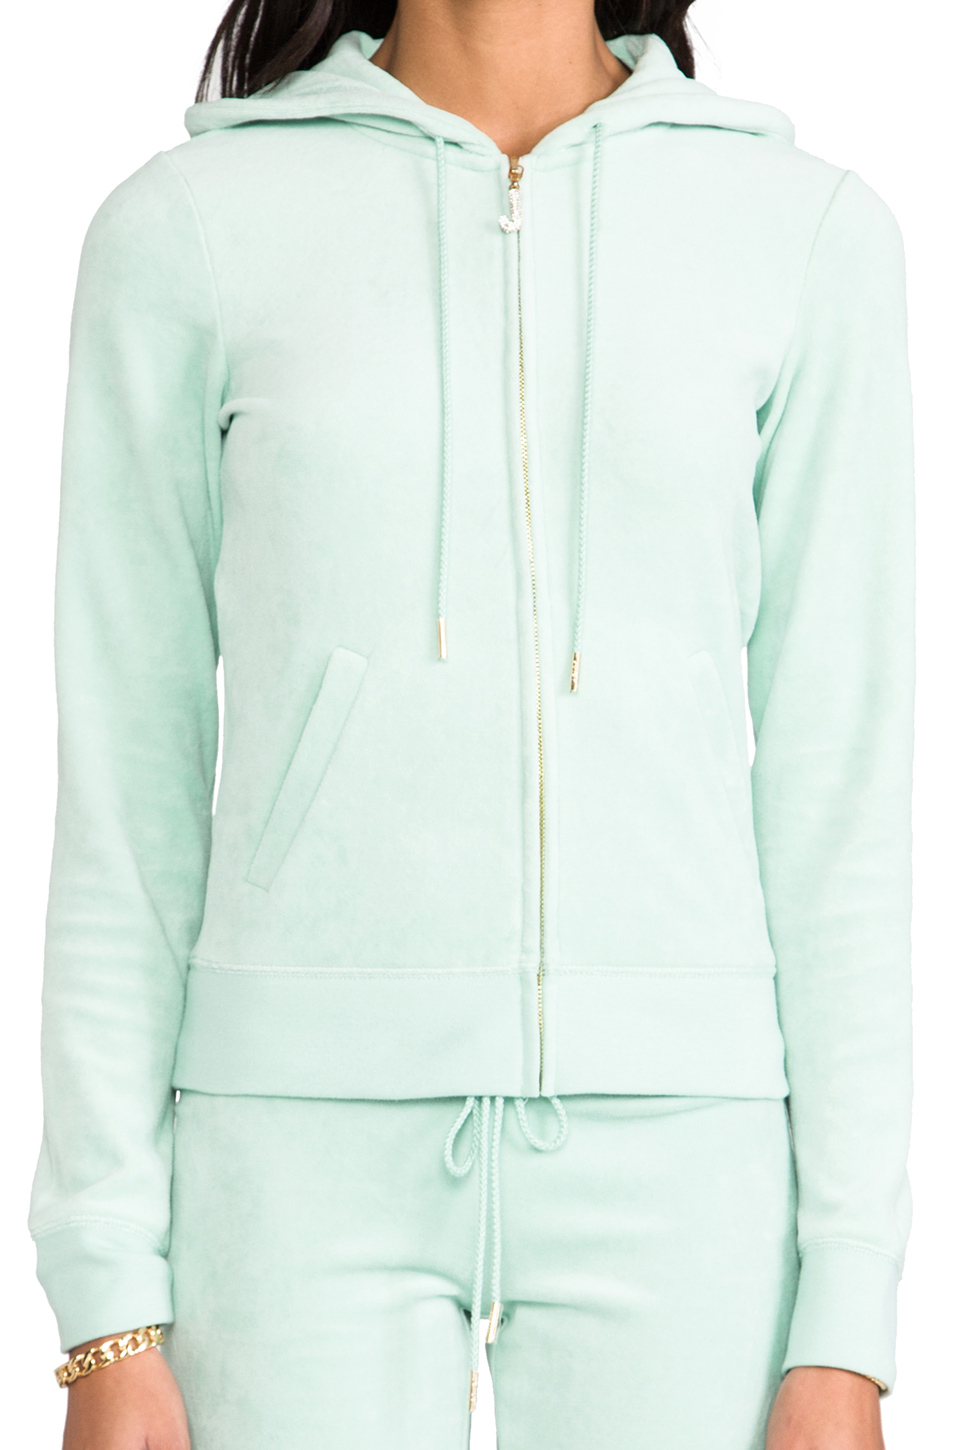 Lyst - Juicy Couture J Bling Hoodie in Mint in Green